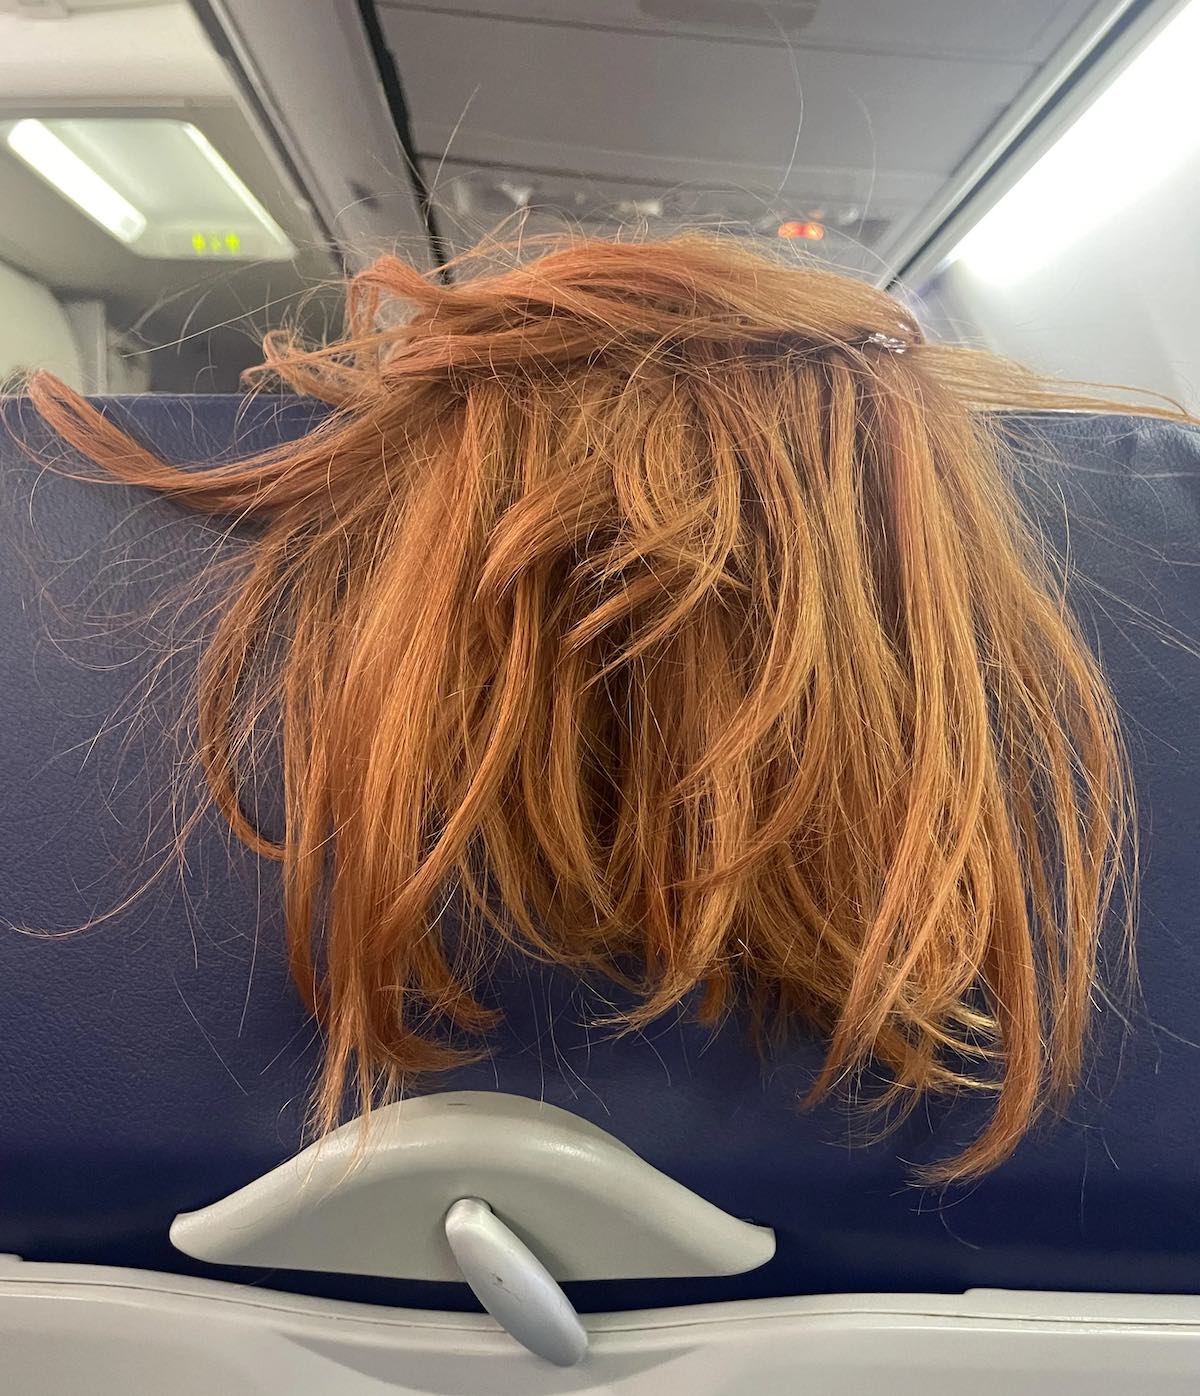 a hair on a seat